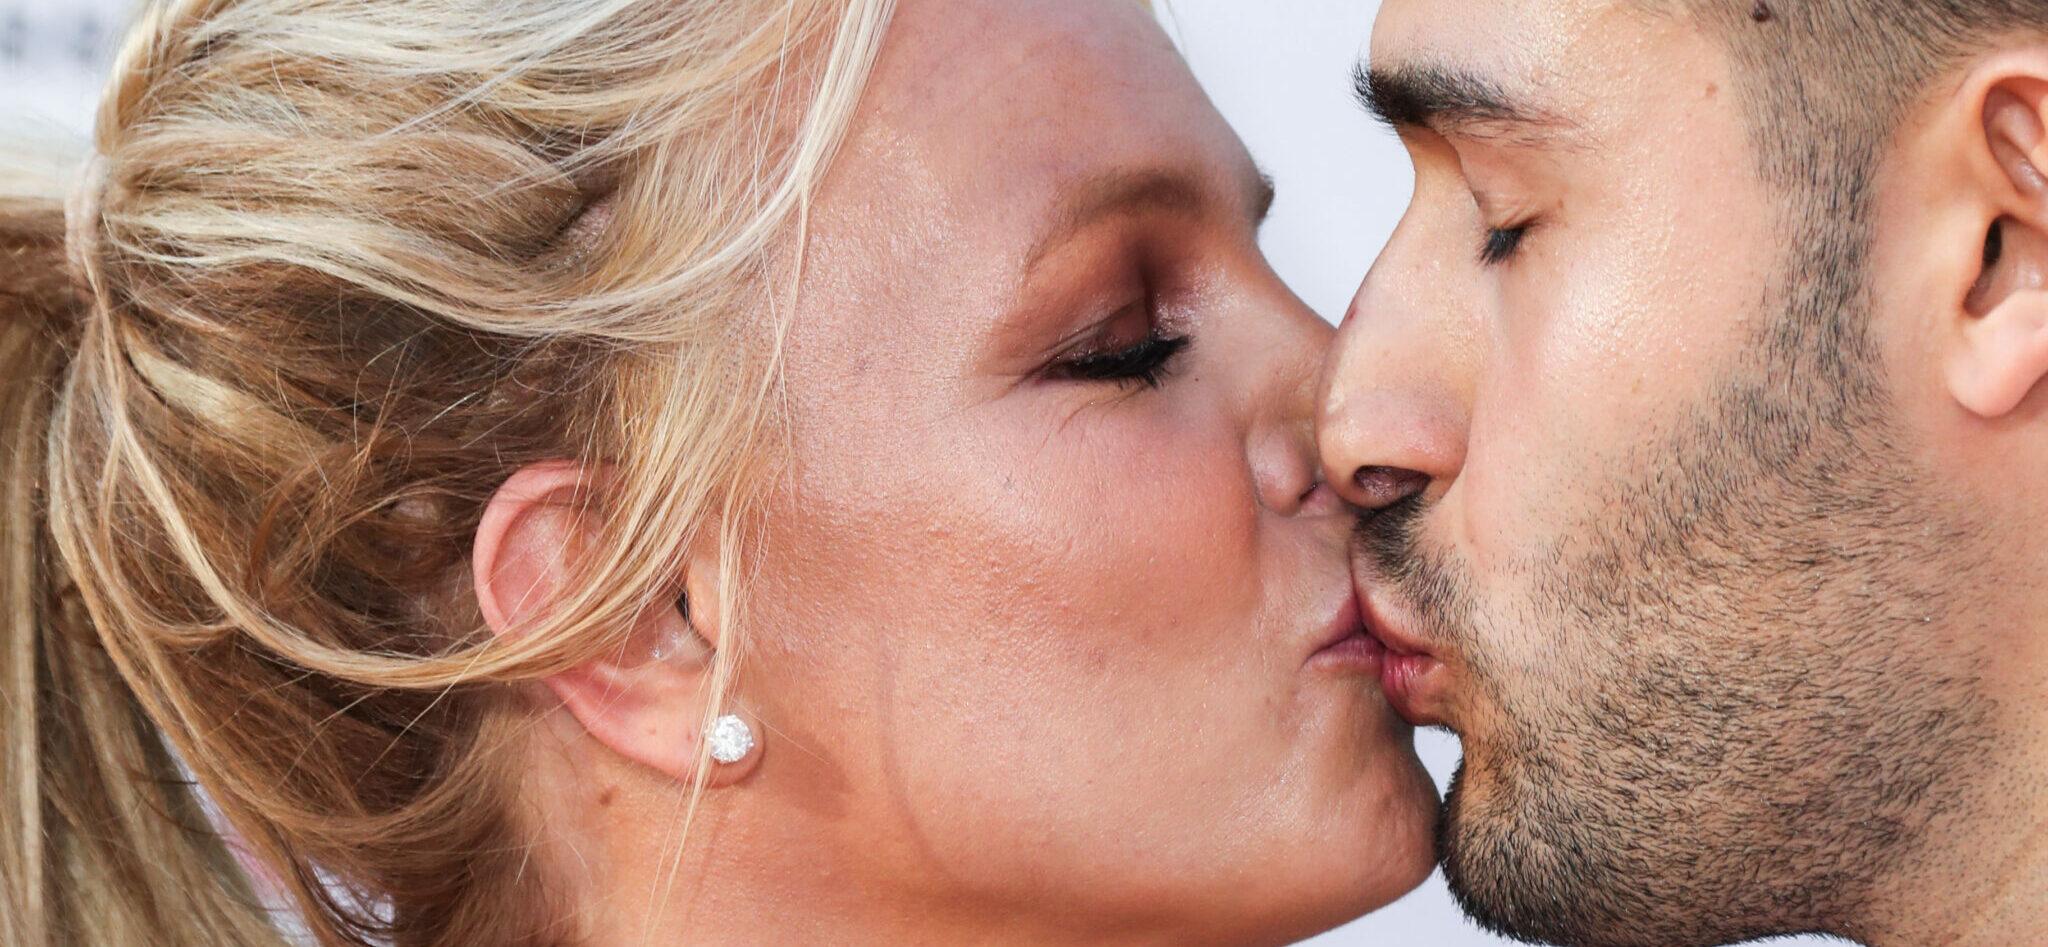 (FILE) Britney Spears Is Engaged to Sam Asghari After Nearly 5 Years Together. HOLLYWOOD, LOS ANGELES, CALIFORNIA, USA - JULY 22: Singer Britney Spears and boyfriend/personal trainer Sam Asghari arrive at the World Premiere Of Sony Pictures' 'Once Upon a Time In Hollywood' held at the TCL Chinese Theatre IMAX on July 22, 2019 in Hollywood, Los Angeles, California, United States. 12 Sep 2021 Pictured: Britney Spears, Sam Asghari. Photo credit: Xavier Collin/Image Press Agency / MEGA TheMegaAgency.com +1 888 505 6342 (Mega Agency TagID: MEGA786488_011.jpg) [Photo via Mega Agency]